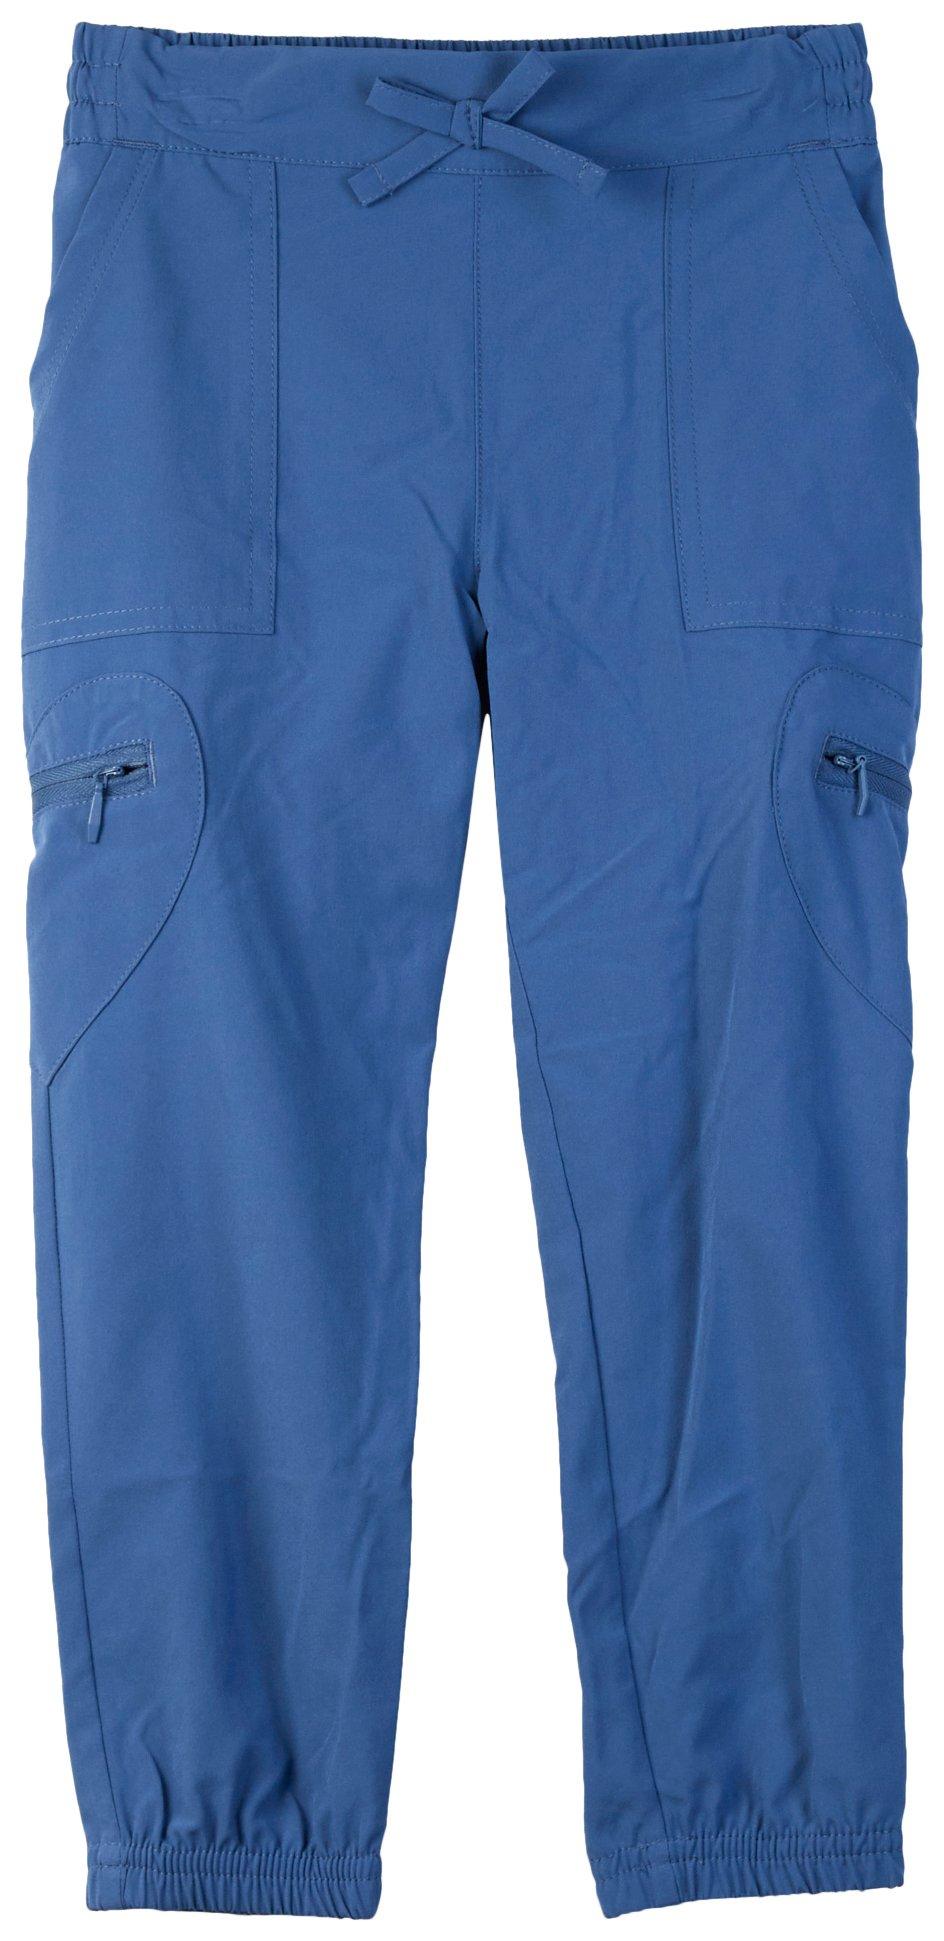 Reel Legends Womens pull on ADVENTURE active fishing pants, size Small